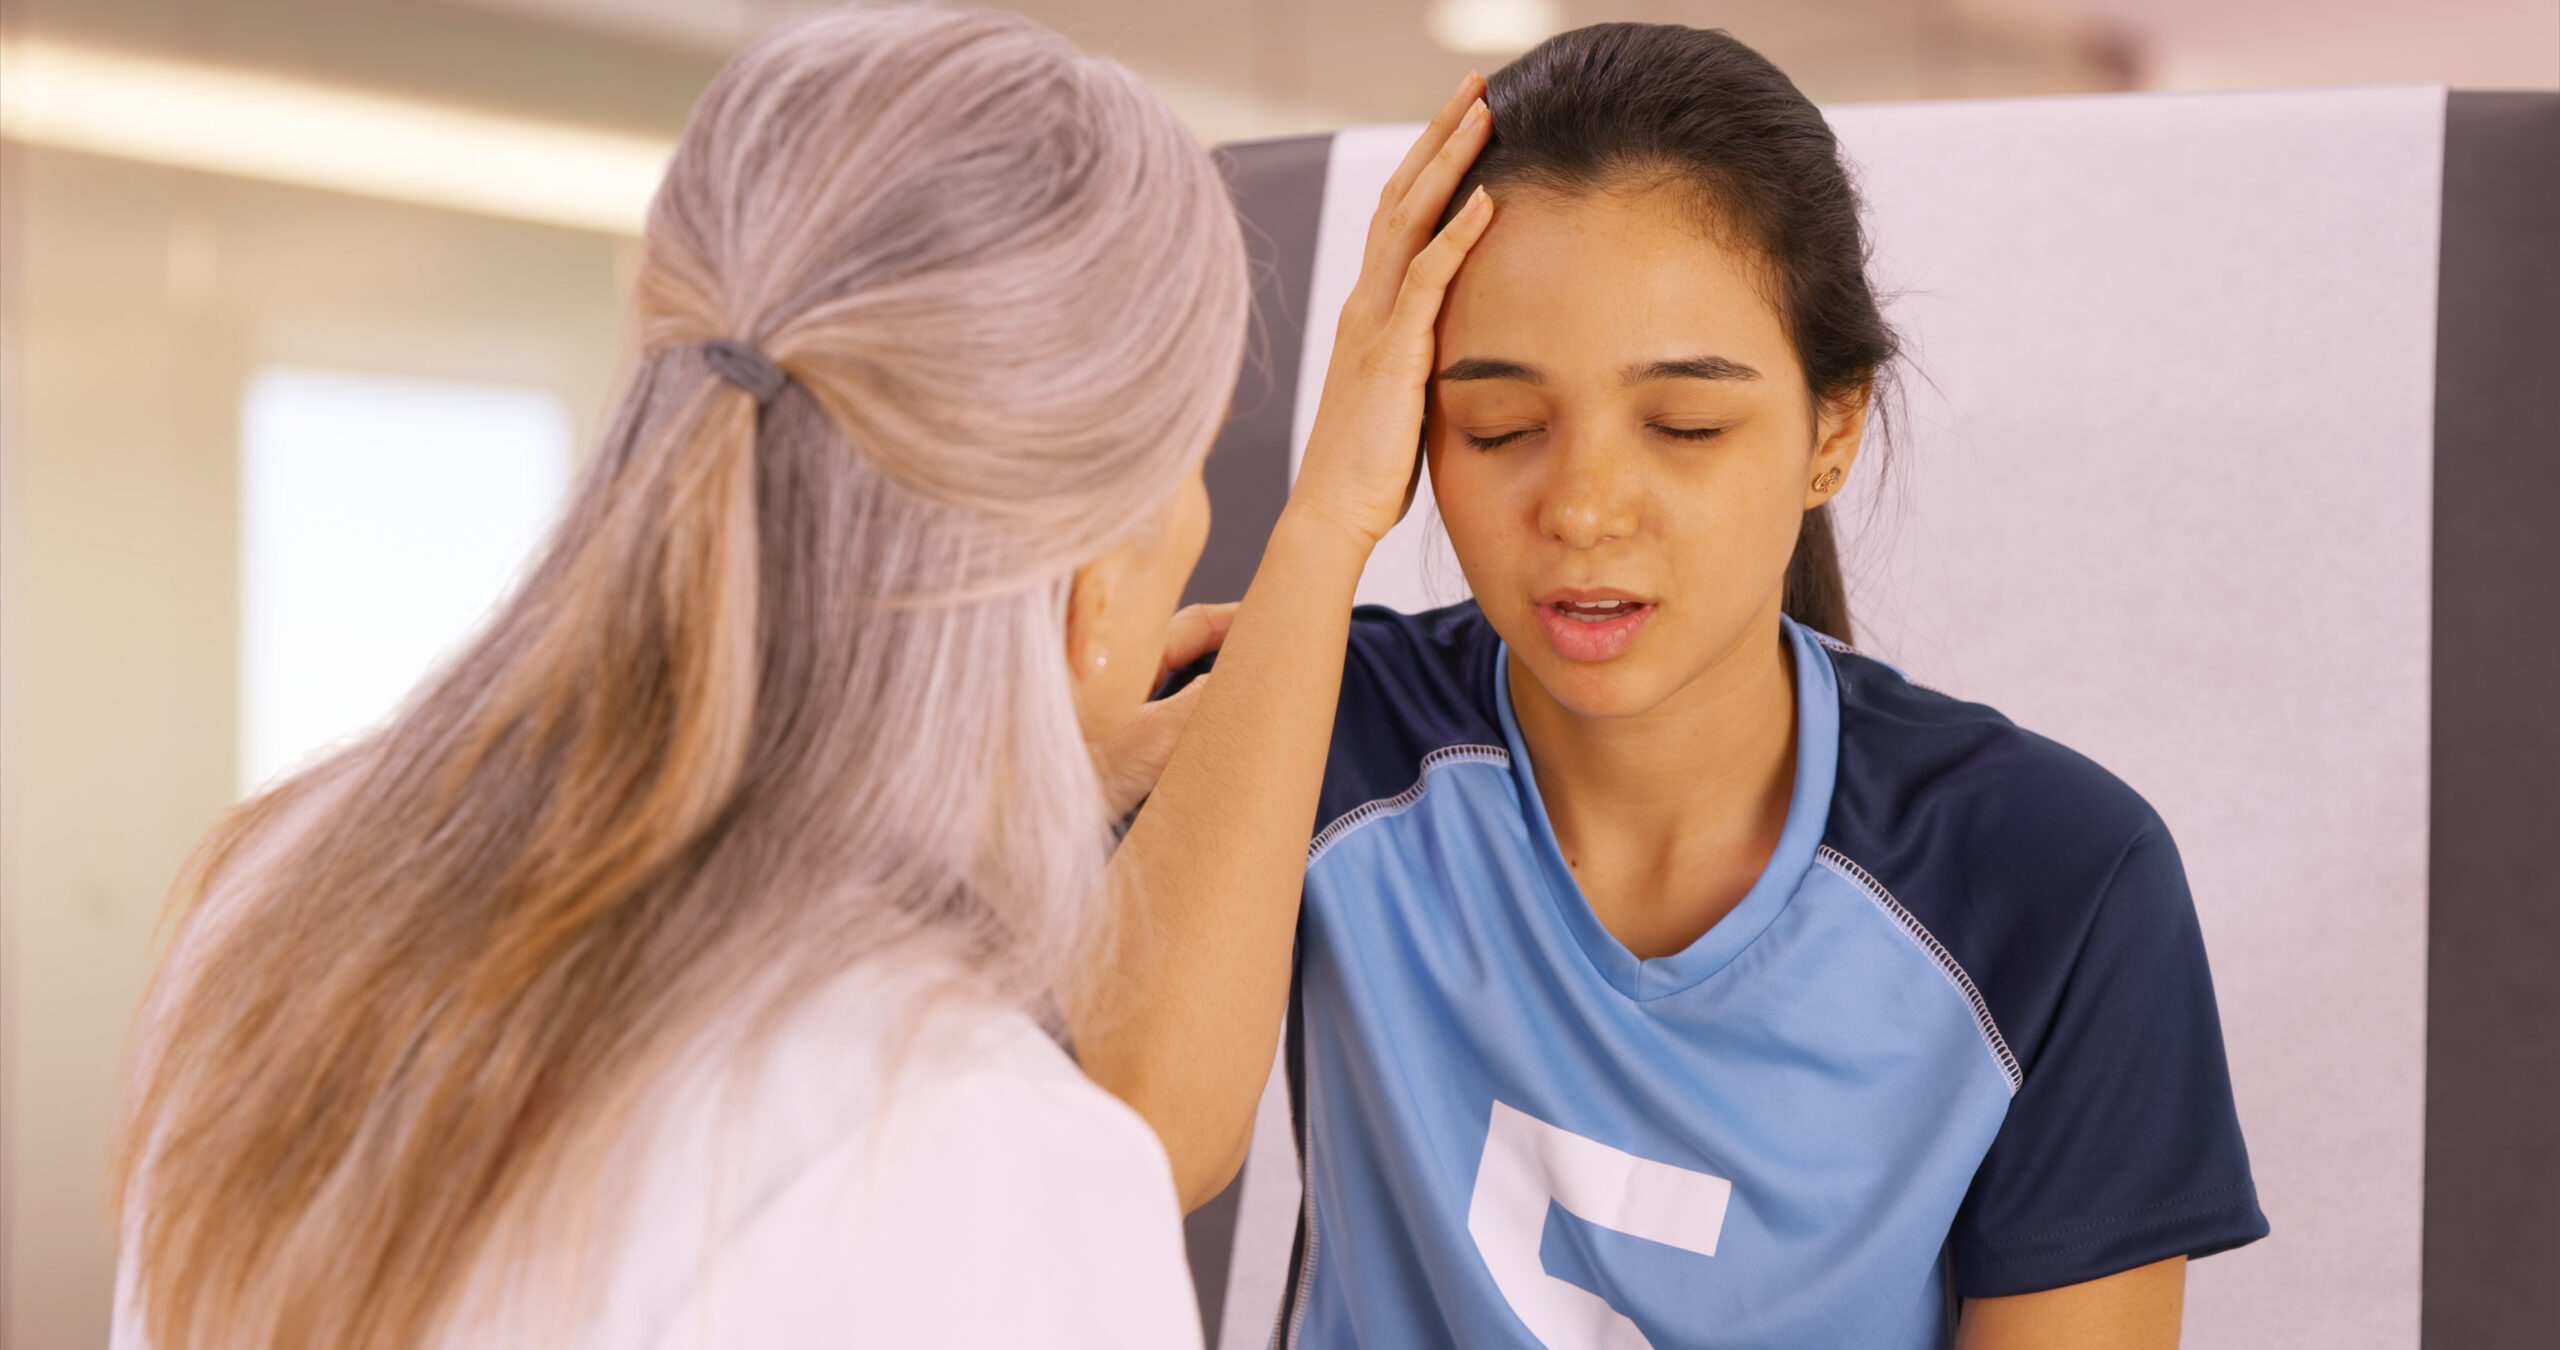 Concussions are no joke. Neurofeedback therapy is a promising treatment for concussions and completely non-invasive.